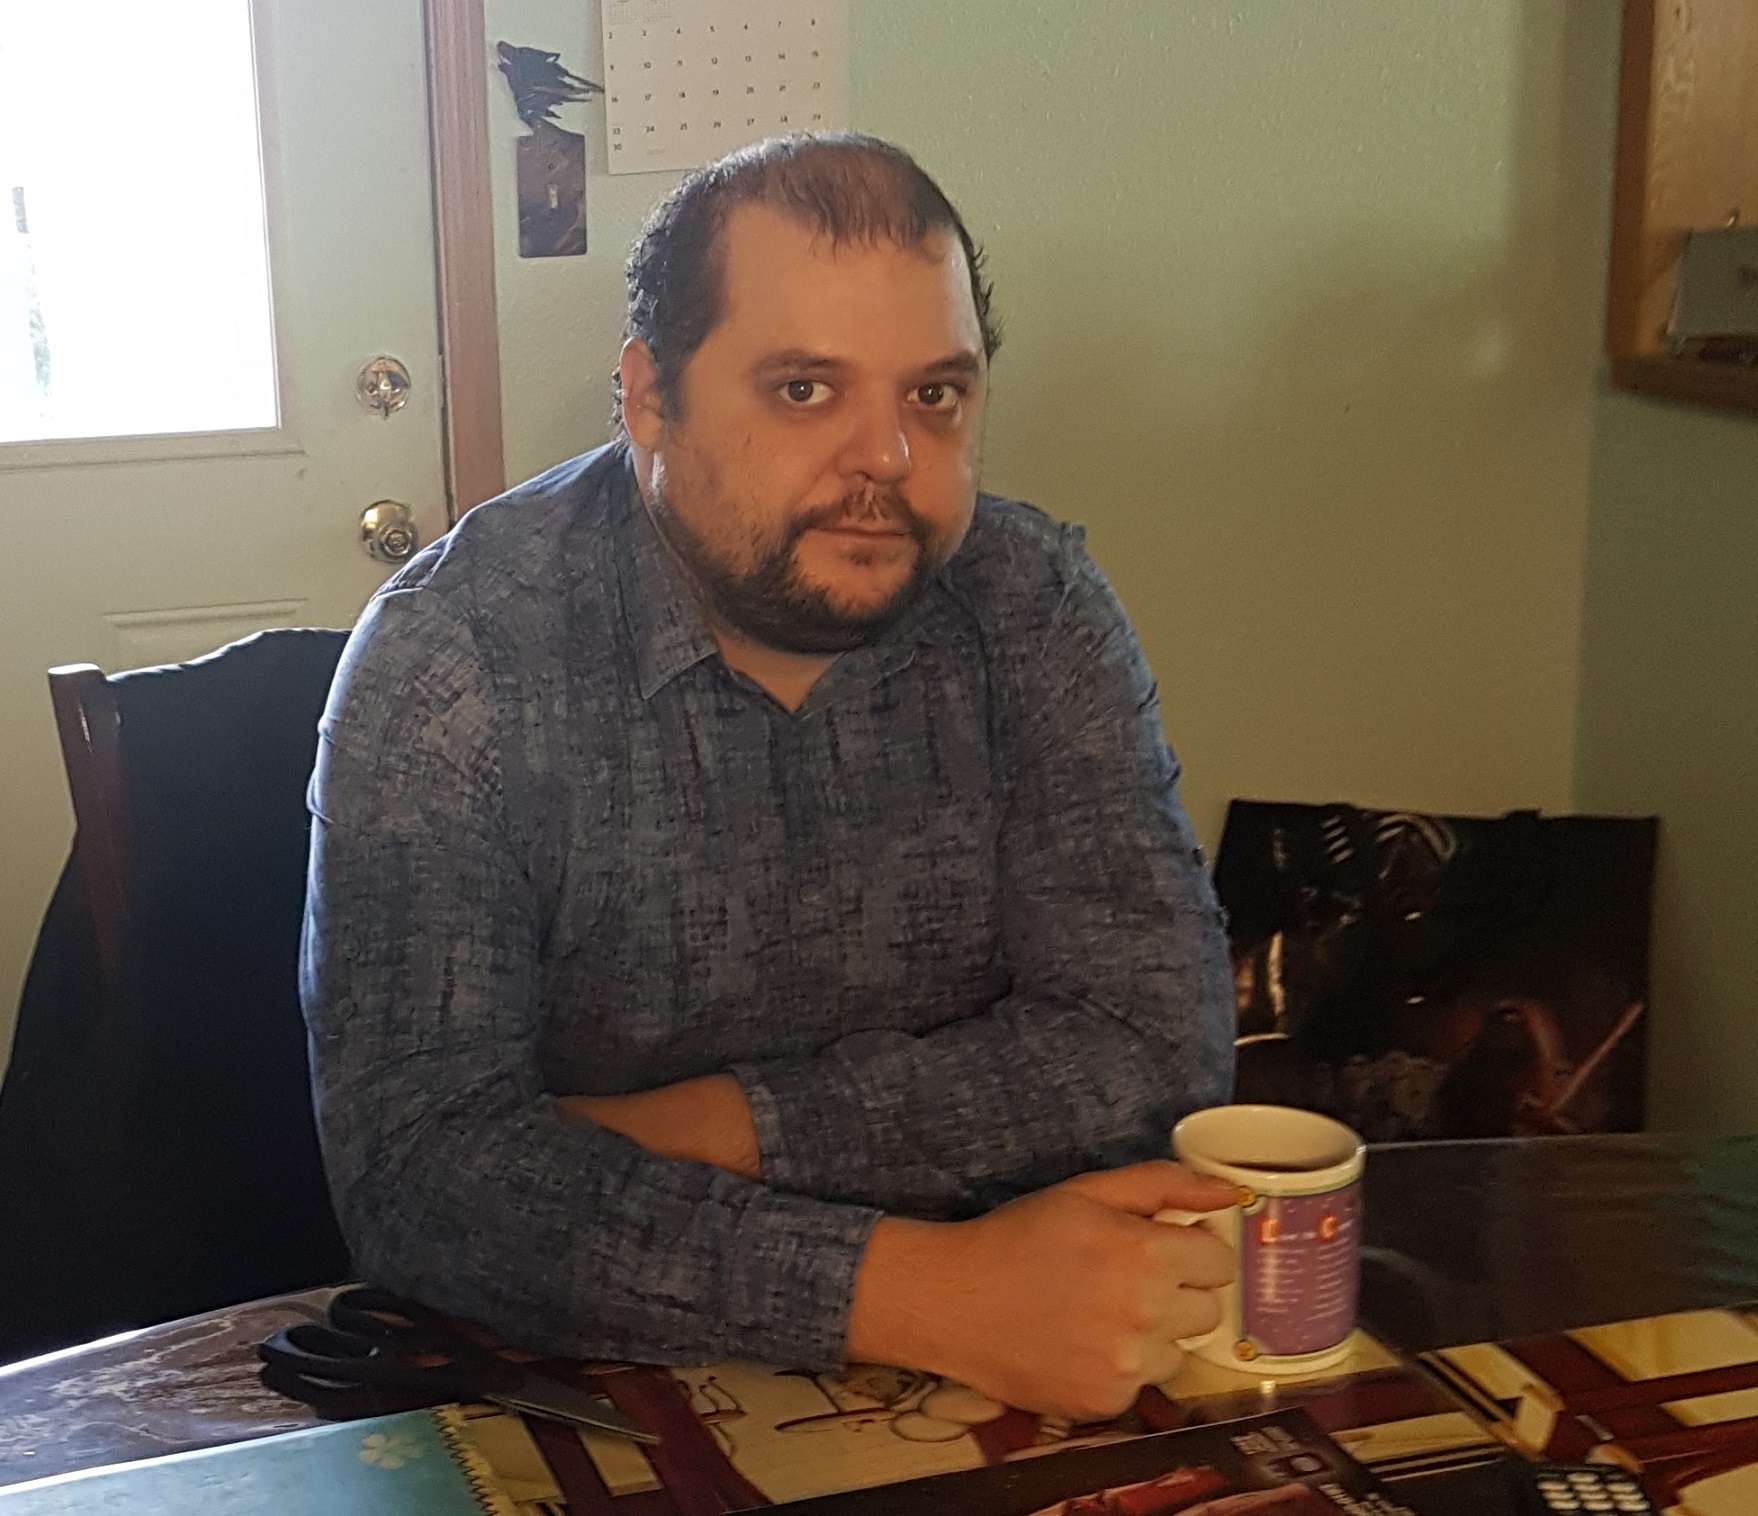 UPDATE: Missing Person Edward Tremblay